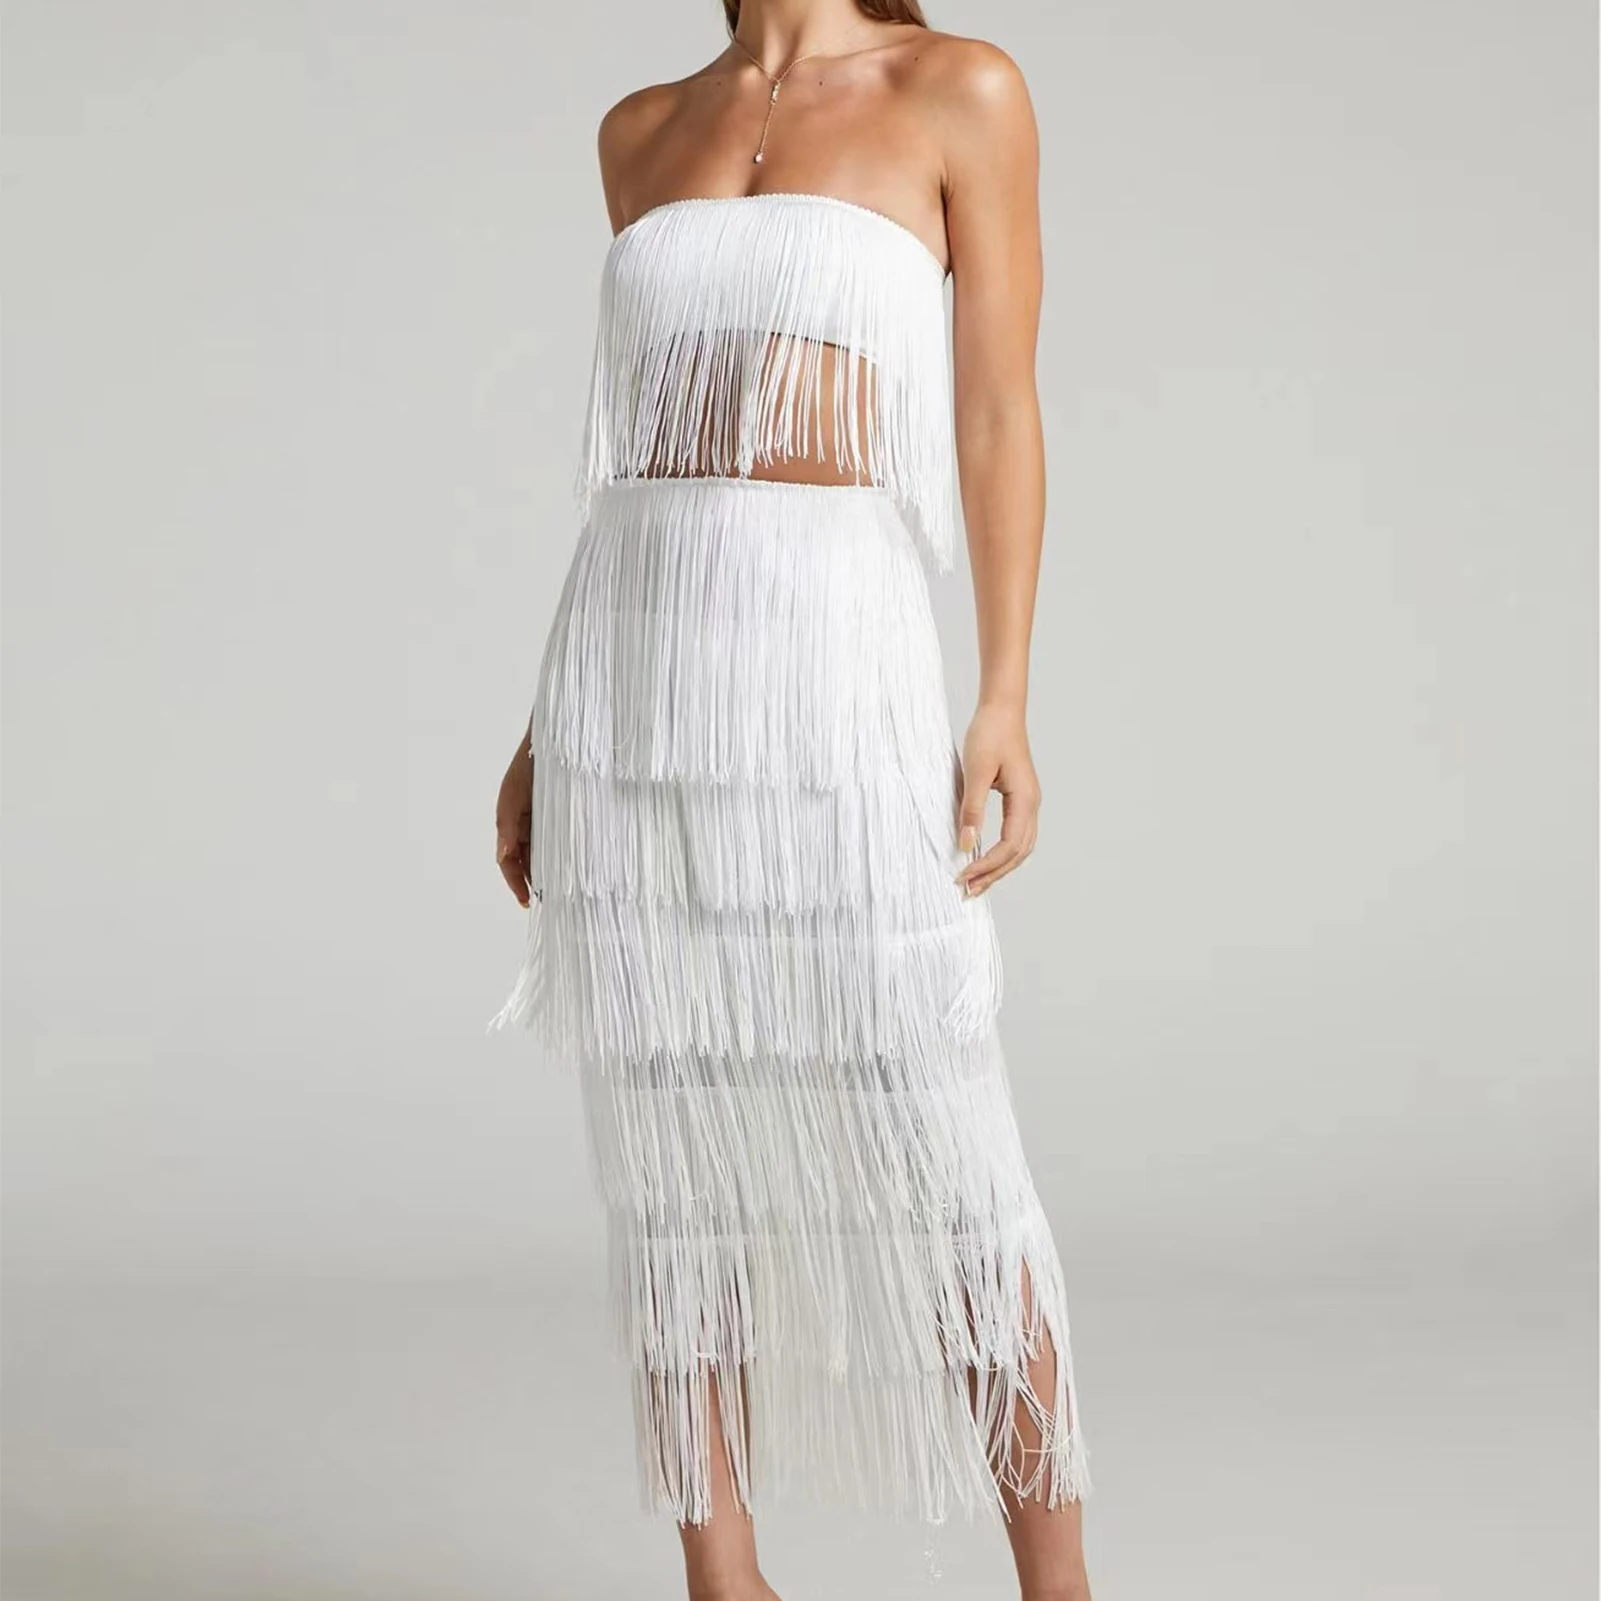 

Women Cami Top Long Skirt Solid Color Fringe Strapless Tops Skirt Navel Exposed Slim Fit Off Shoulder Dancing Party Clothing New